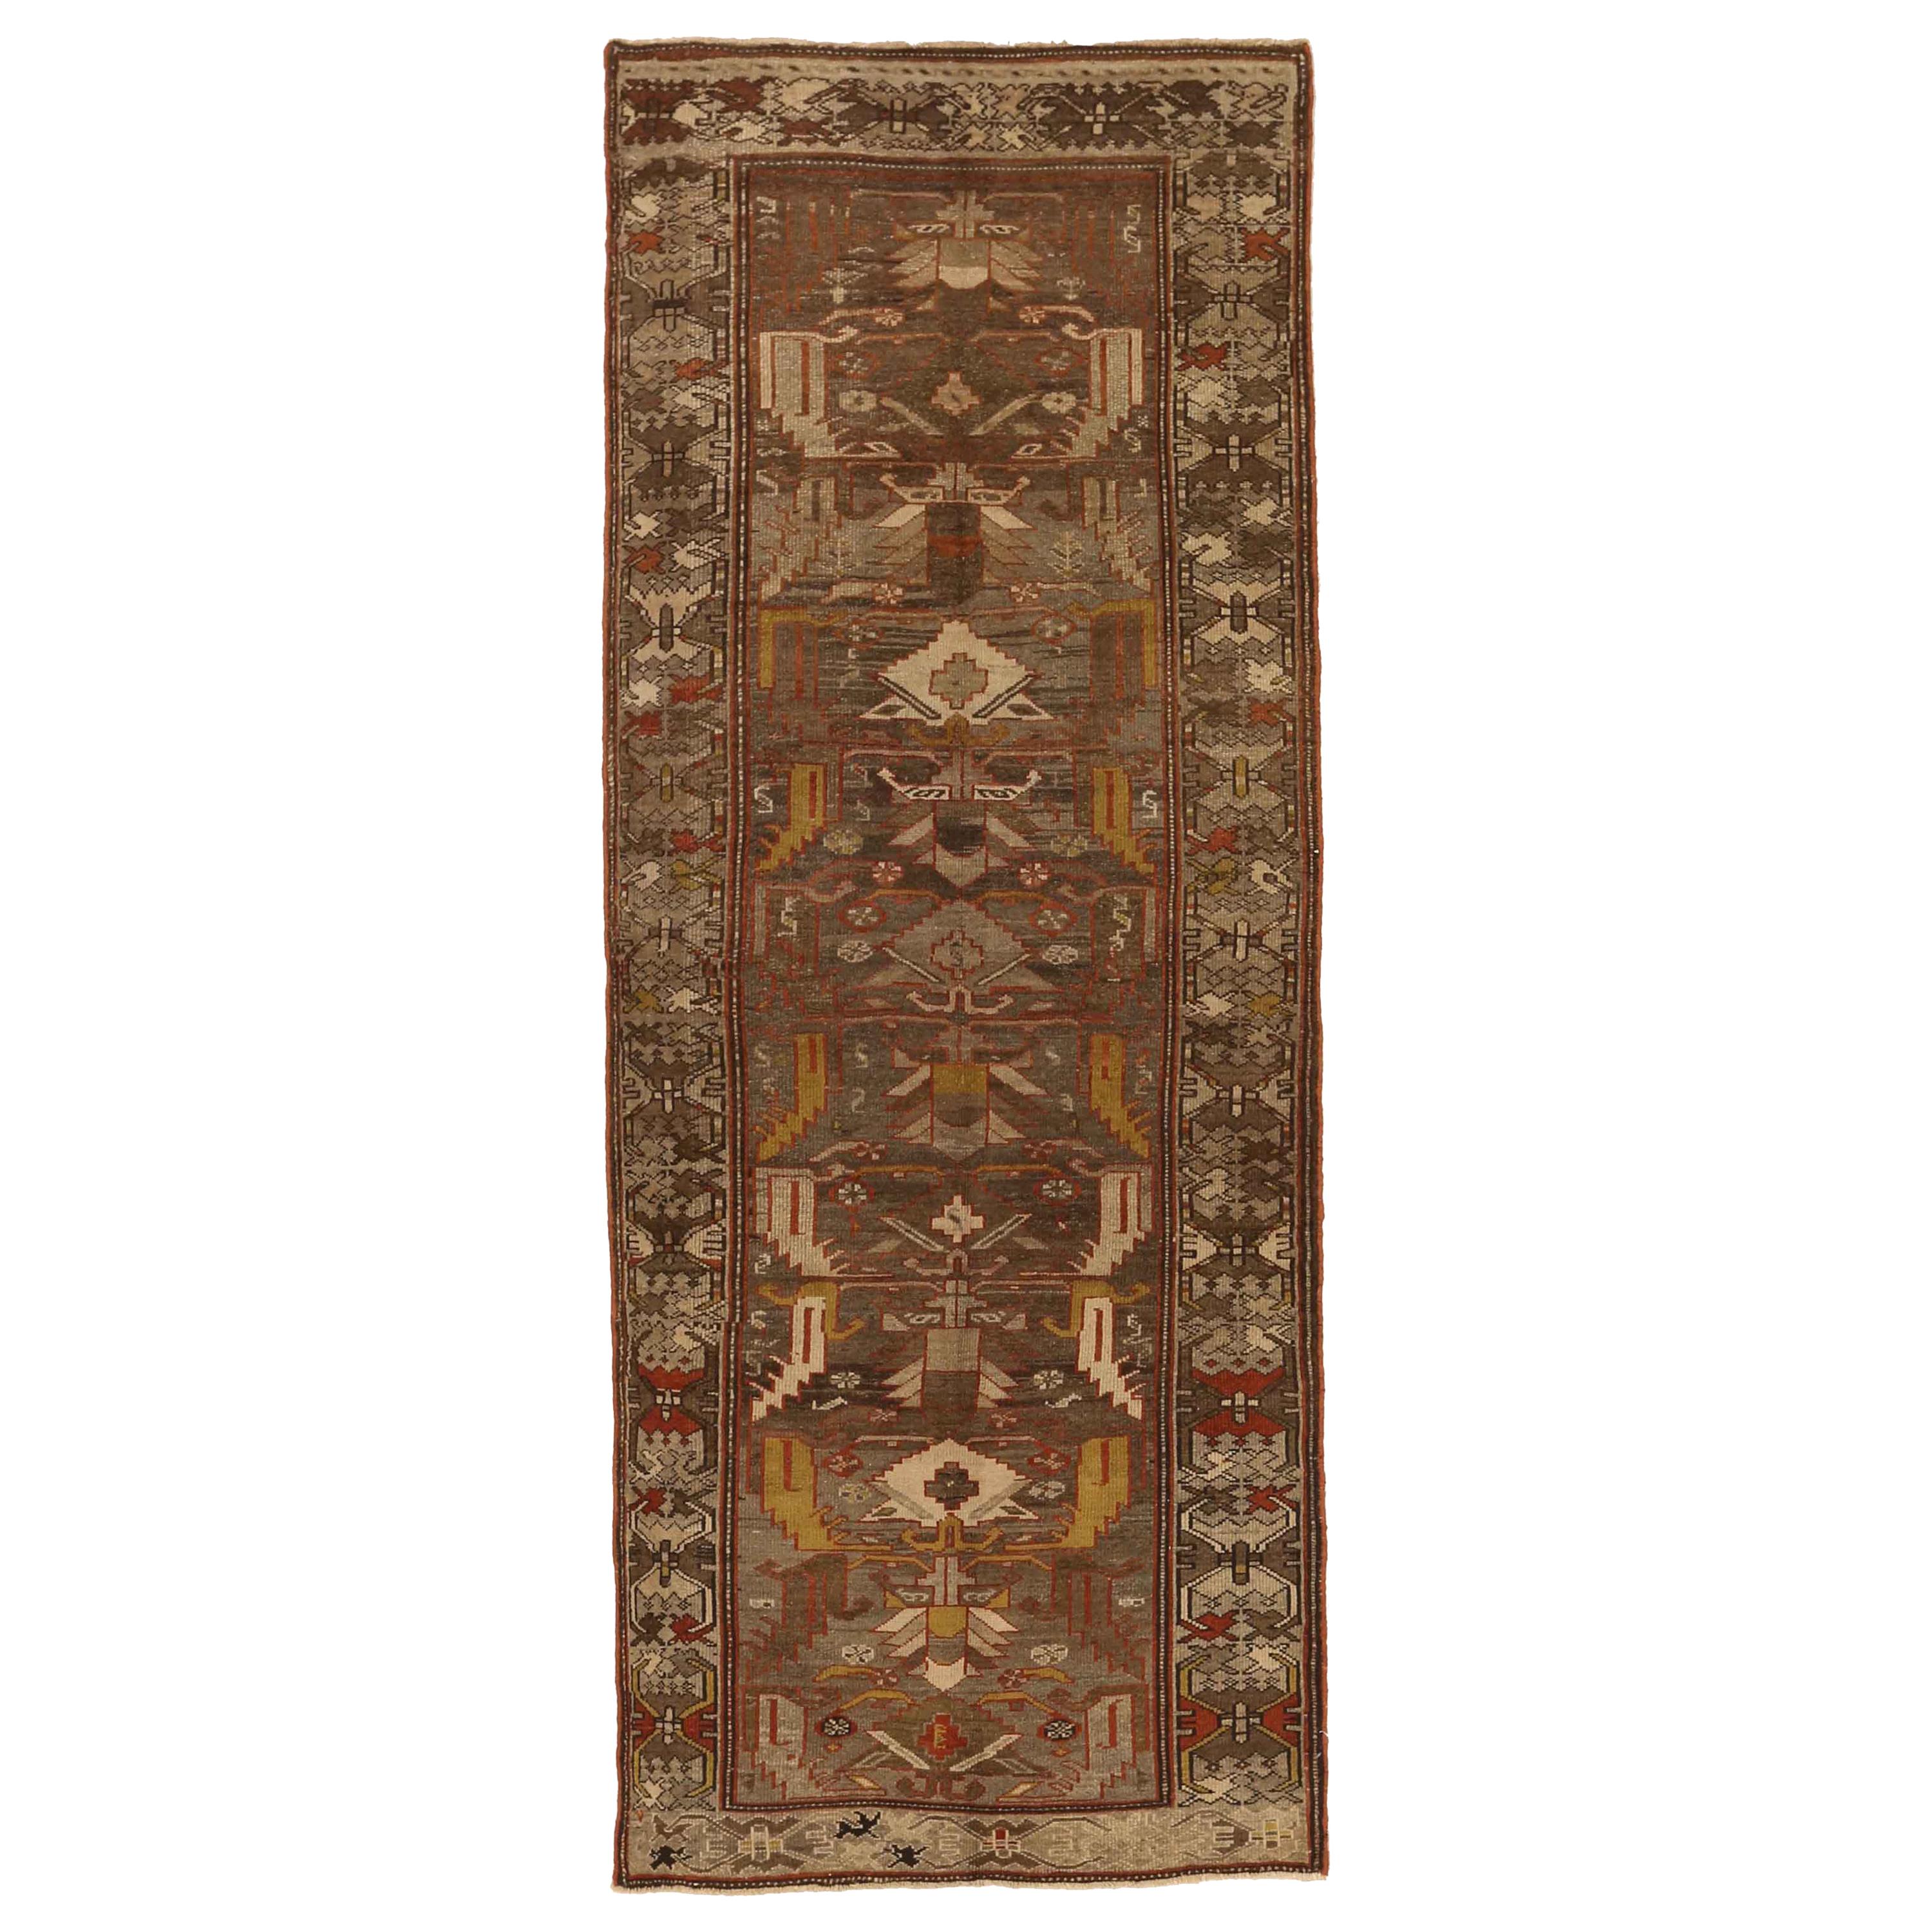 Antique Persian Rug Zanjan Design with Striking Tribal Patterns, circa 1950s For Sale